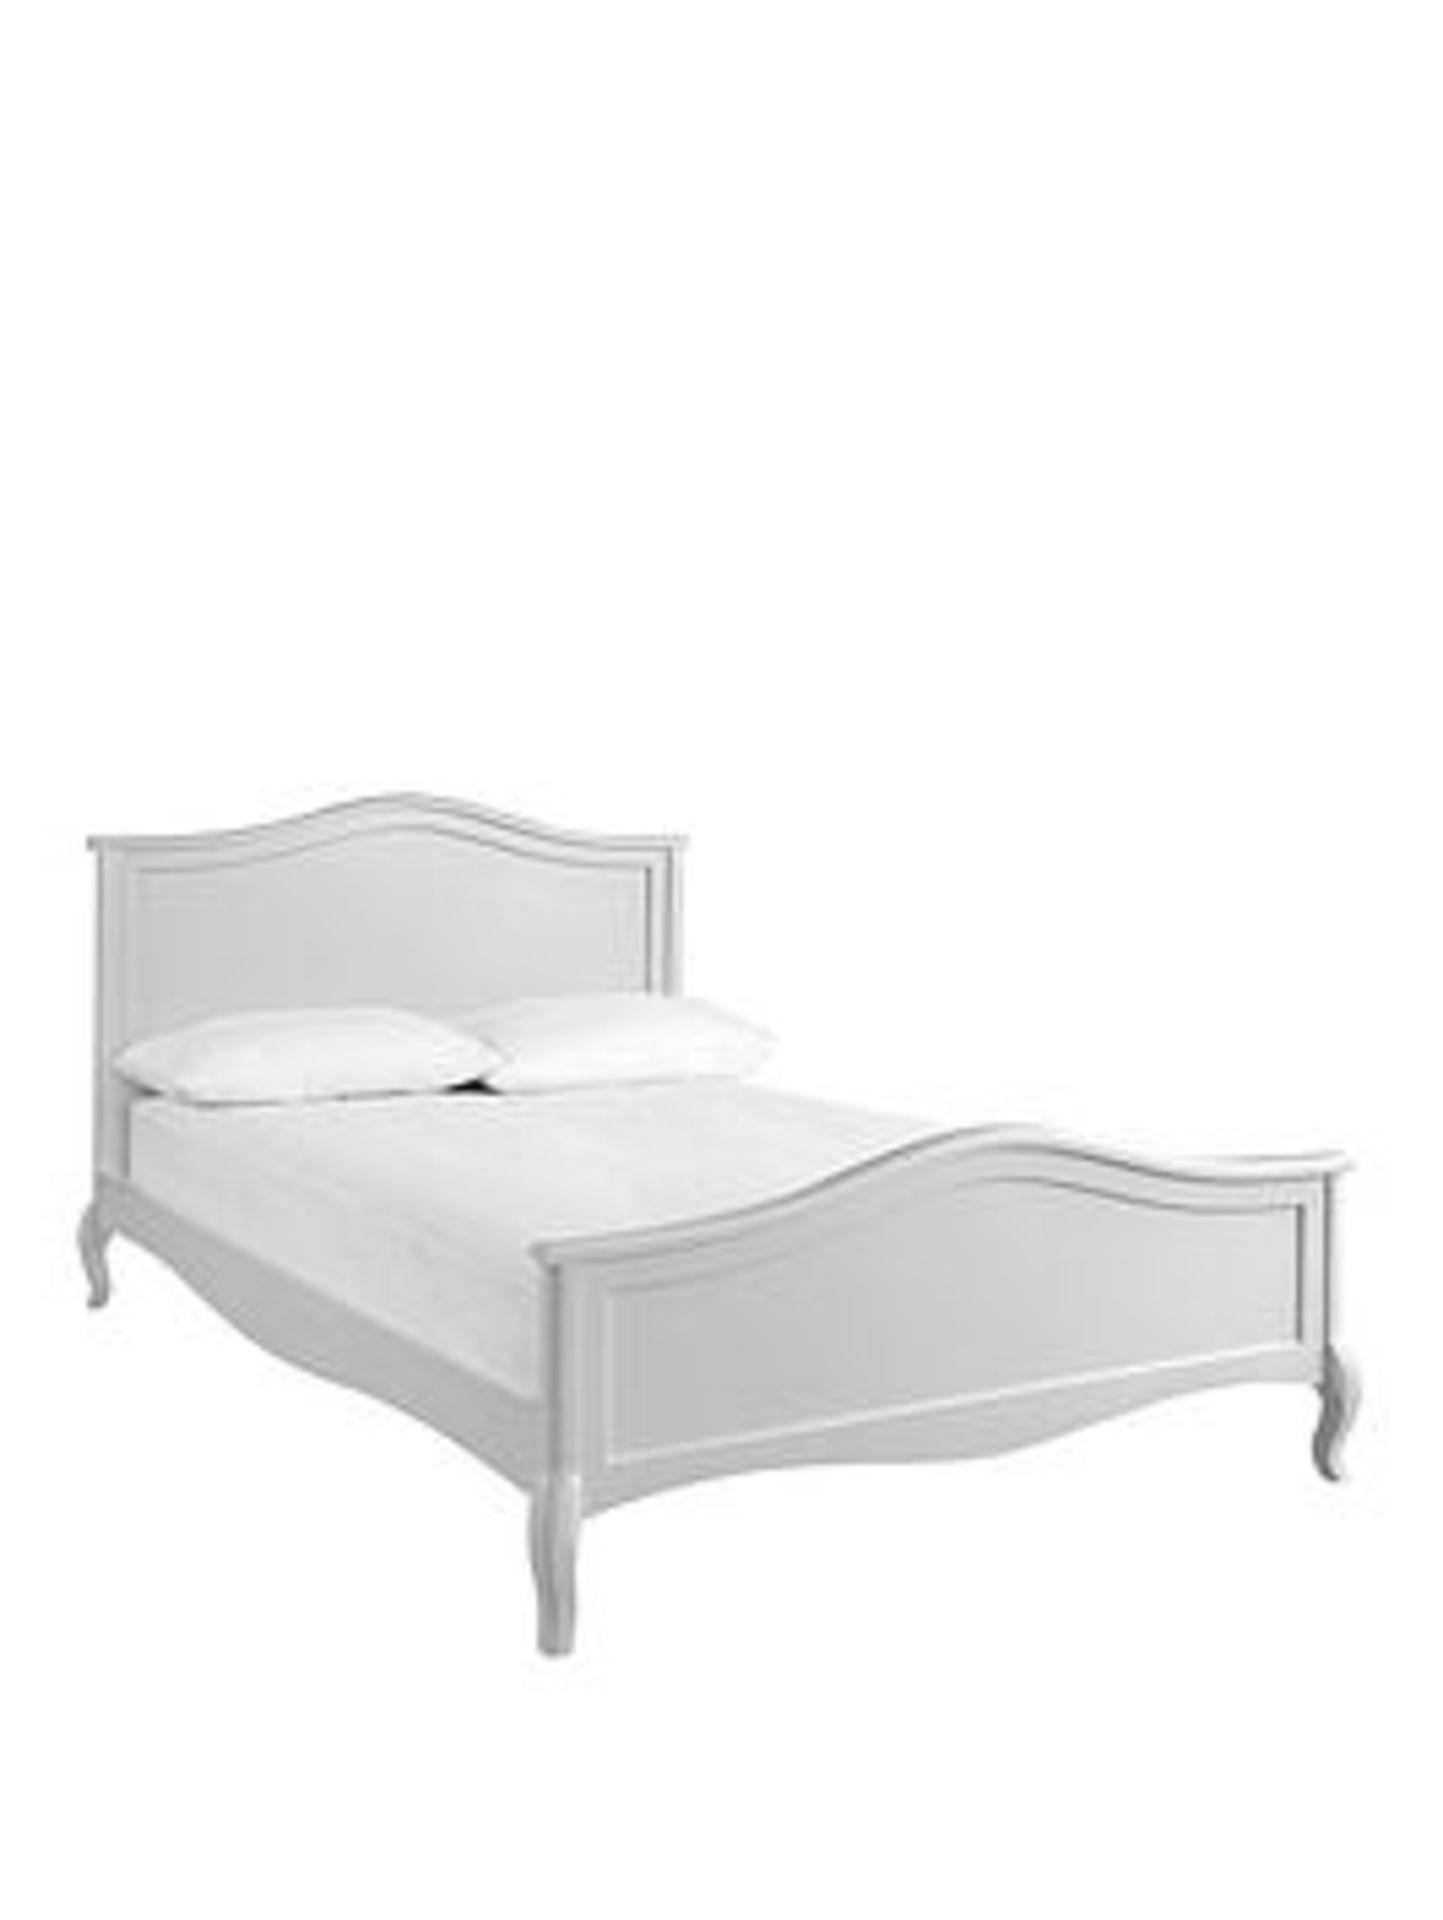 Boxed Item Olivia King Bed [Grey] 110X160X208Cm rrp, £612.0